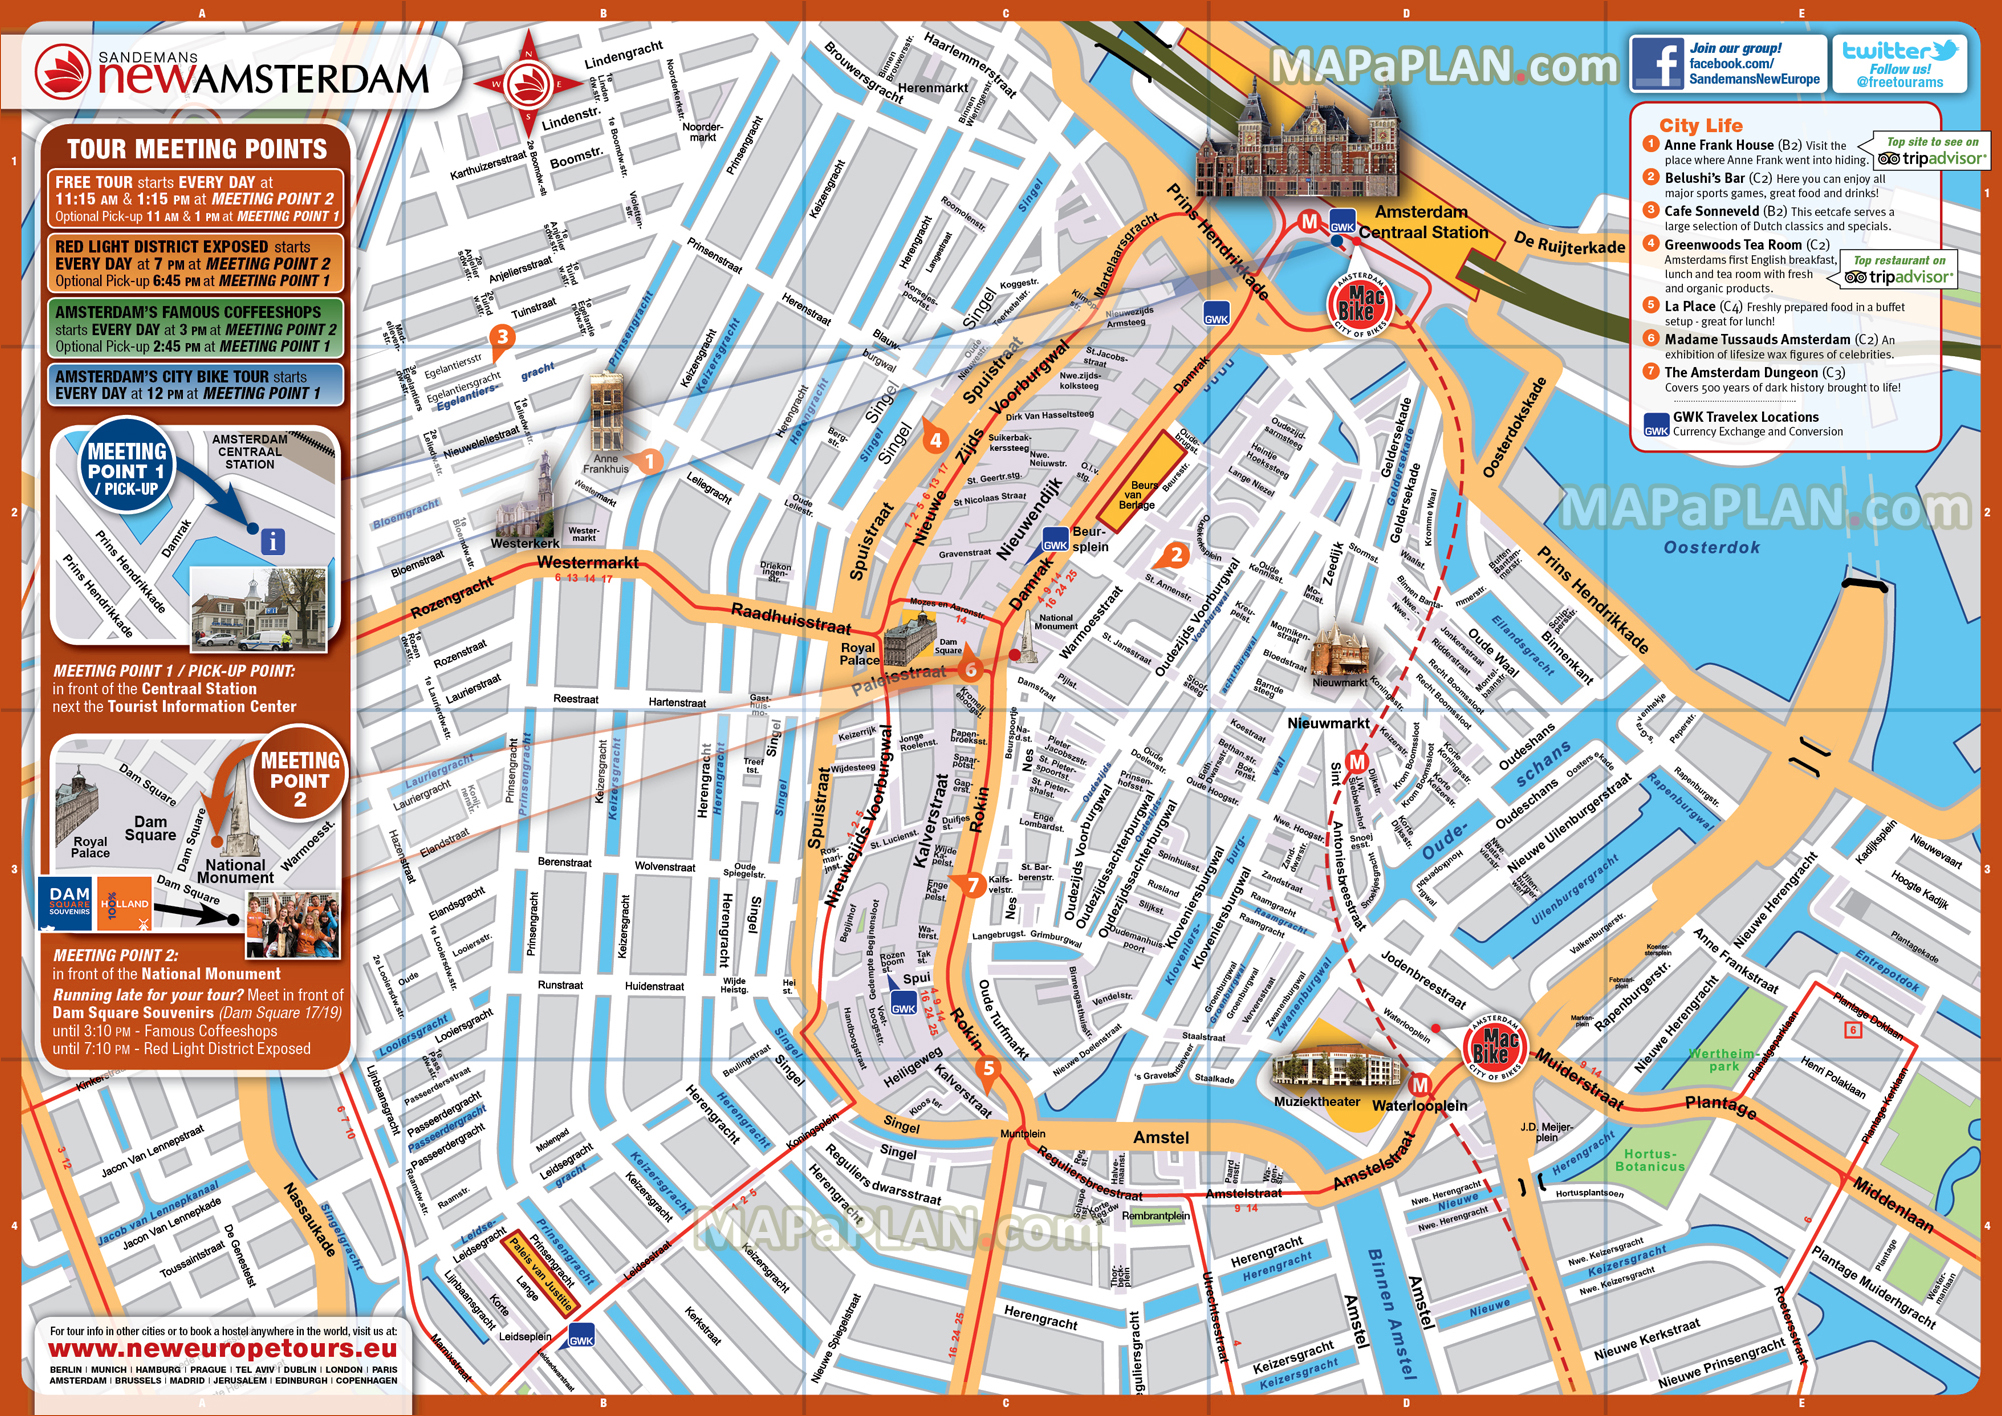 Red Light District Exposed Famous Coffeeshops City Bike bicycle Tours Amsterdam top tourist attractions map